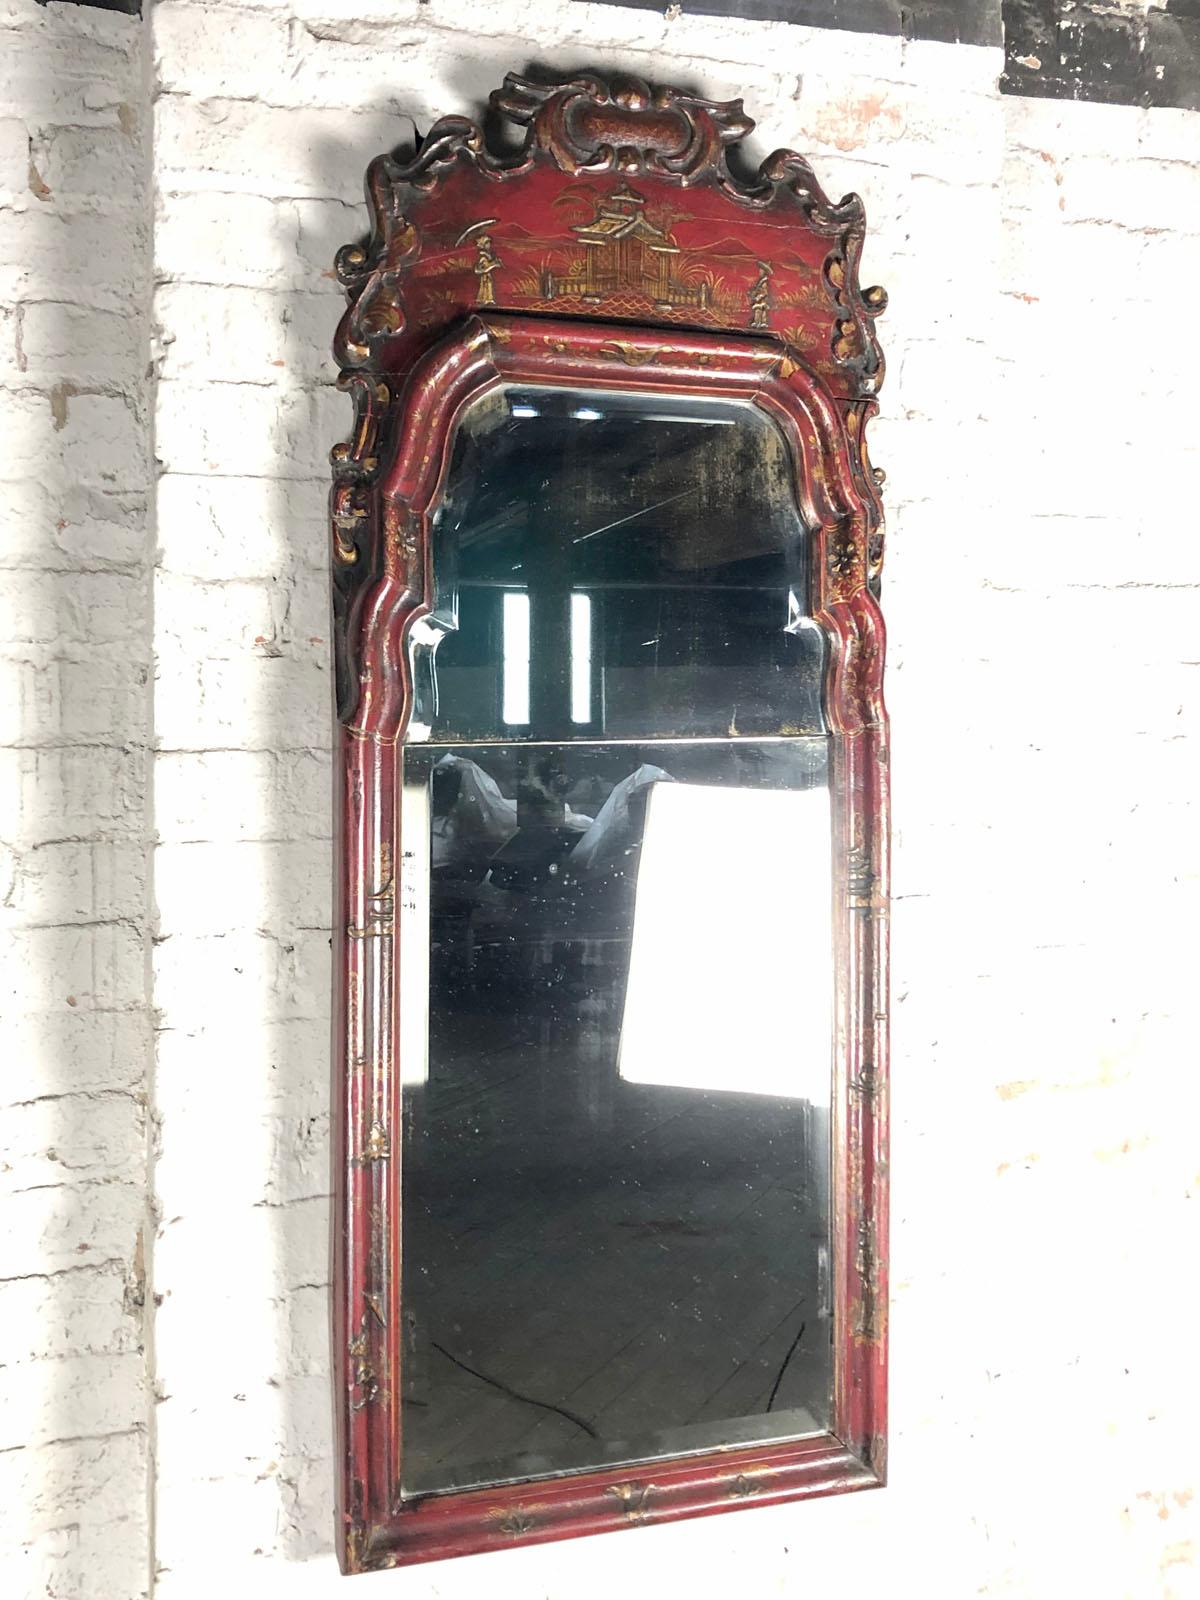 English Queen Anne Period red Chinoiserie decorated mirror of typical form with a strongly molded frame surrounding the divided mirror plate, topped by a crest with a vividly sculpted edge, uniquely carved of solid pieces of oak.